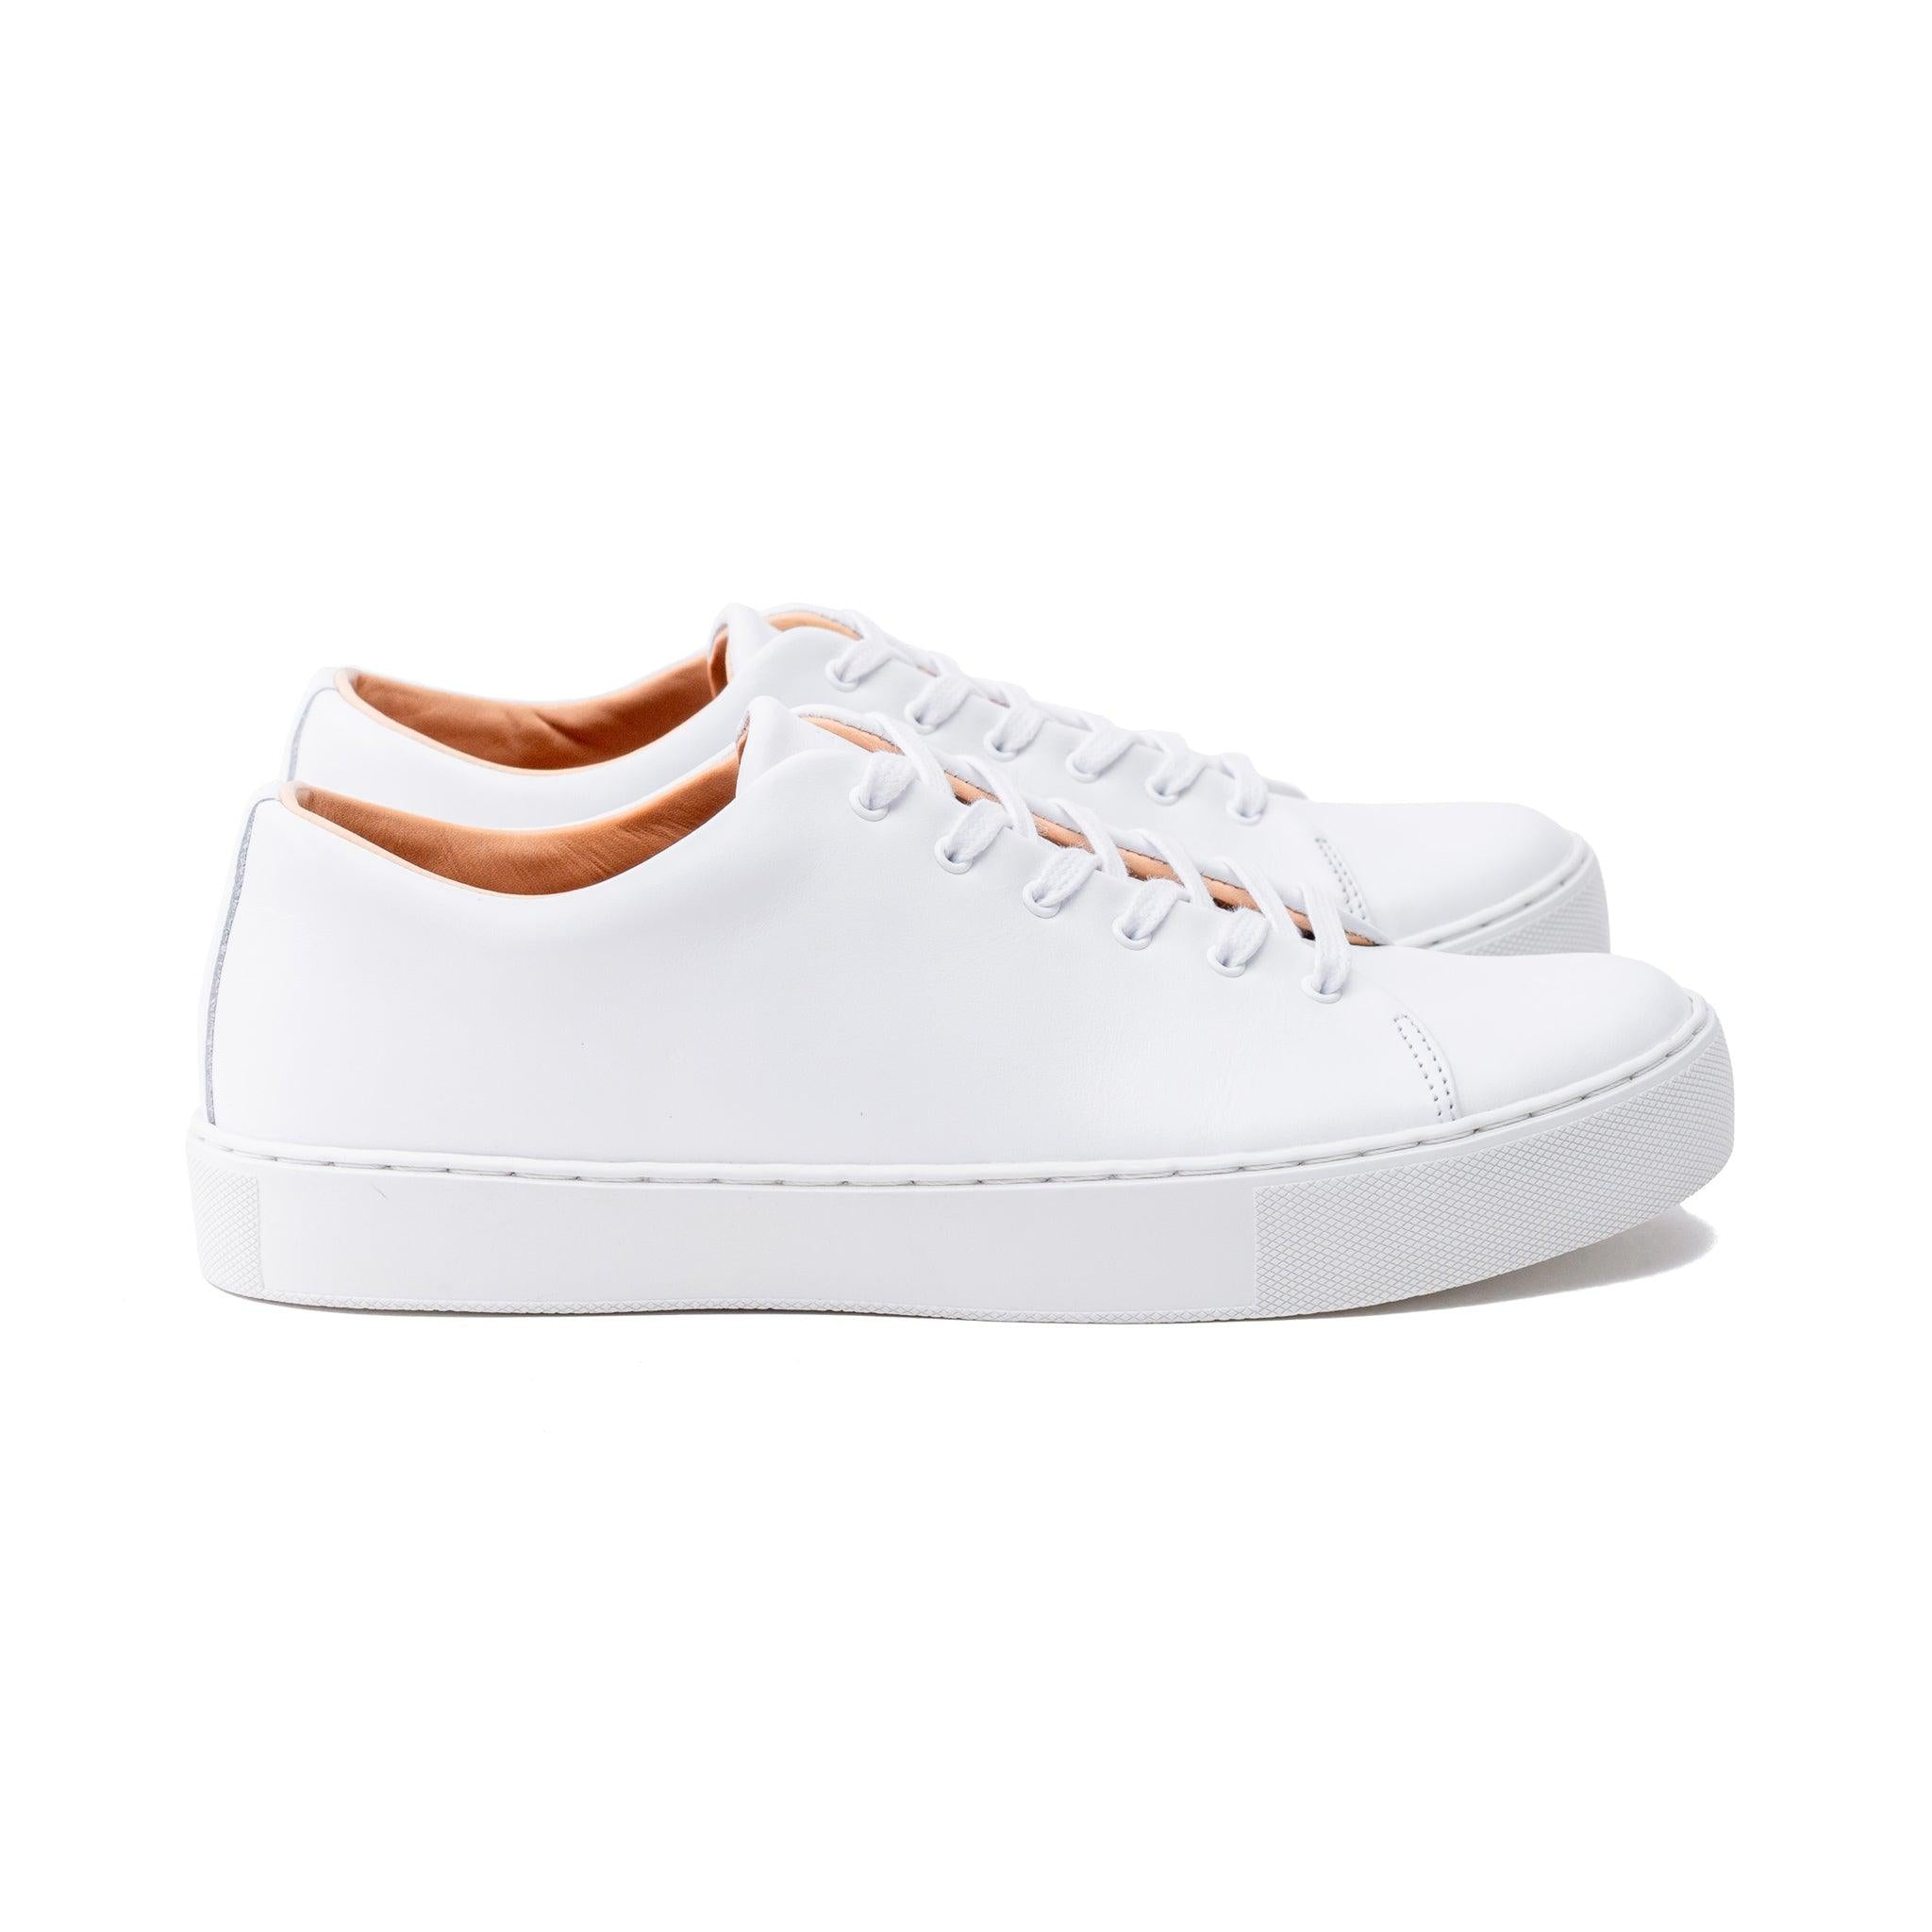 leather all white sneakers